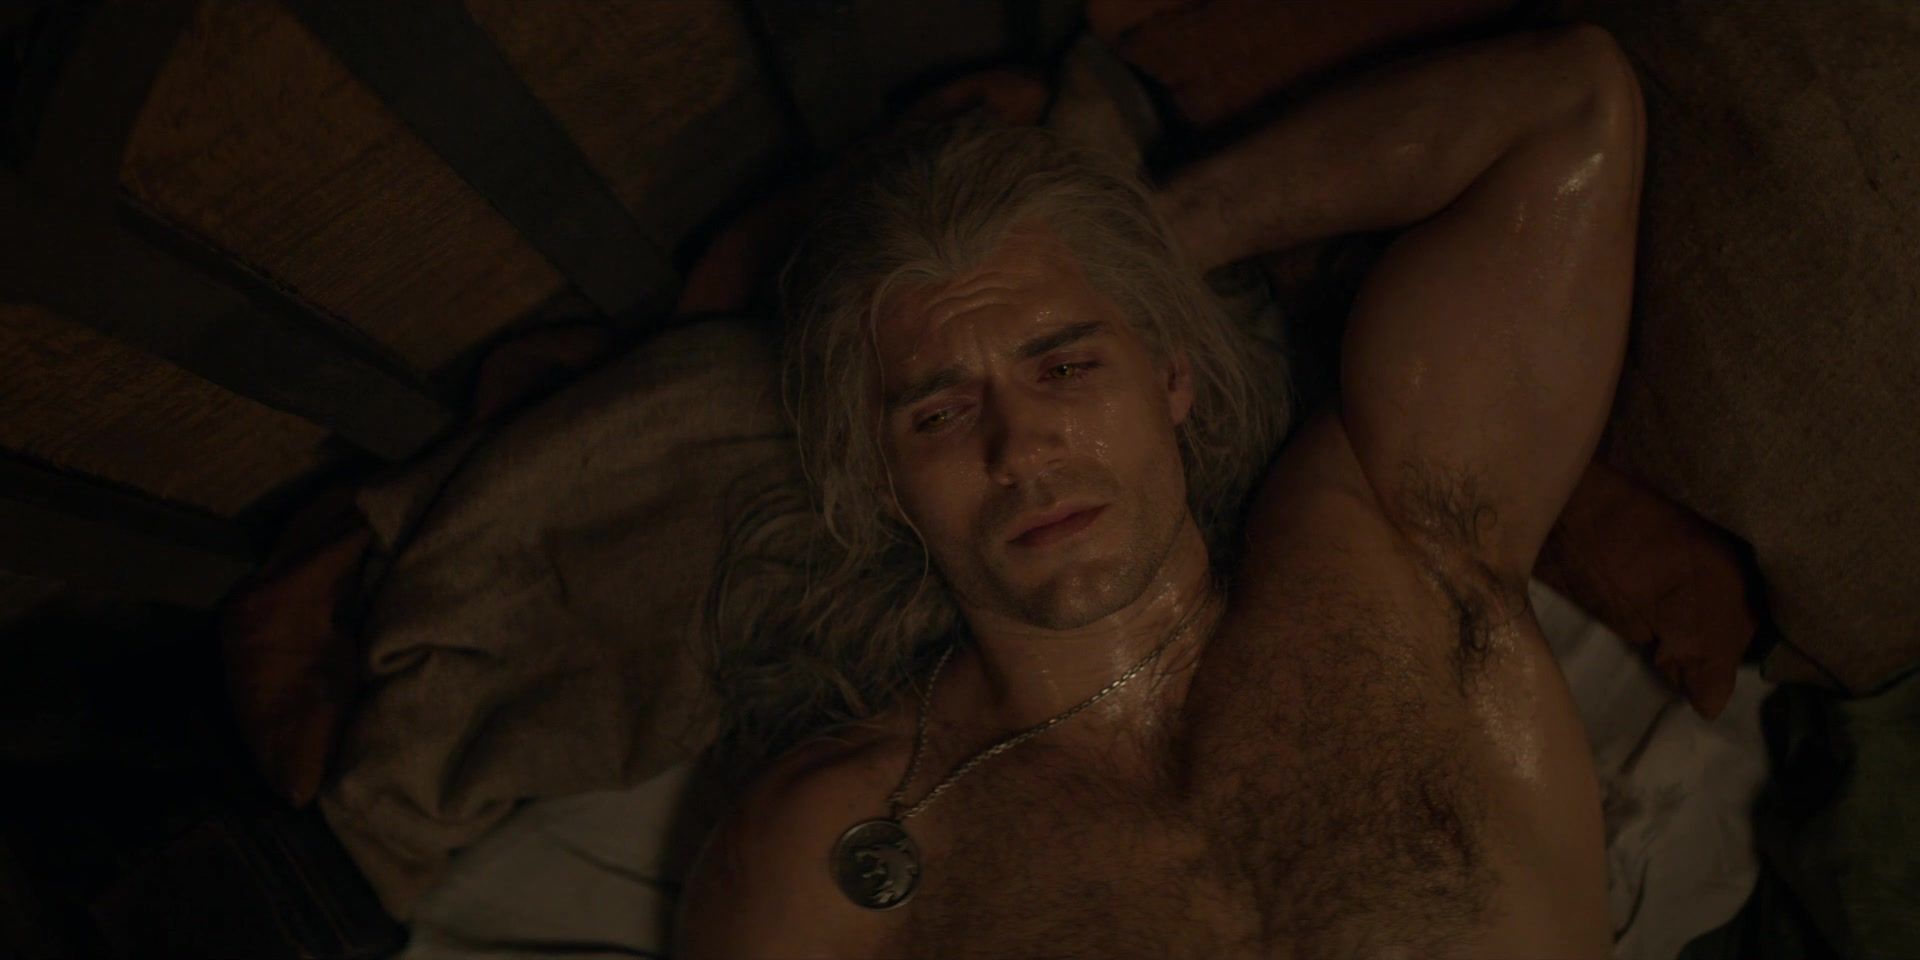 Spooning Nude Imogen Daines - The Witcher s01e03 (2019) Behind - 2